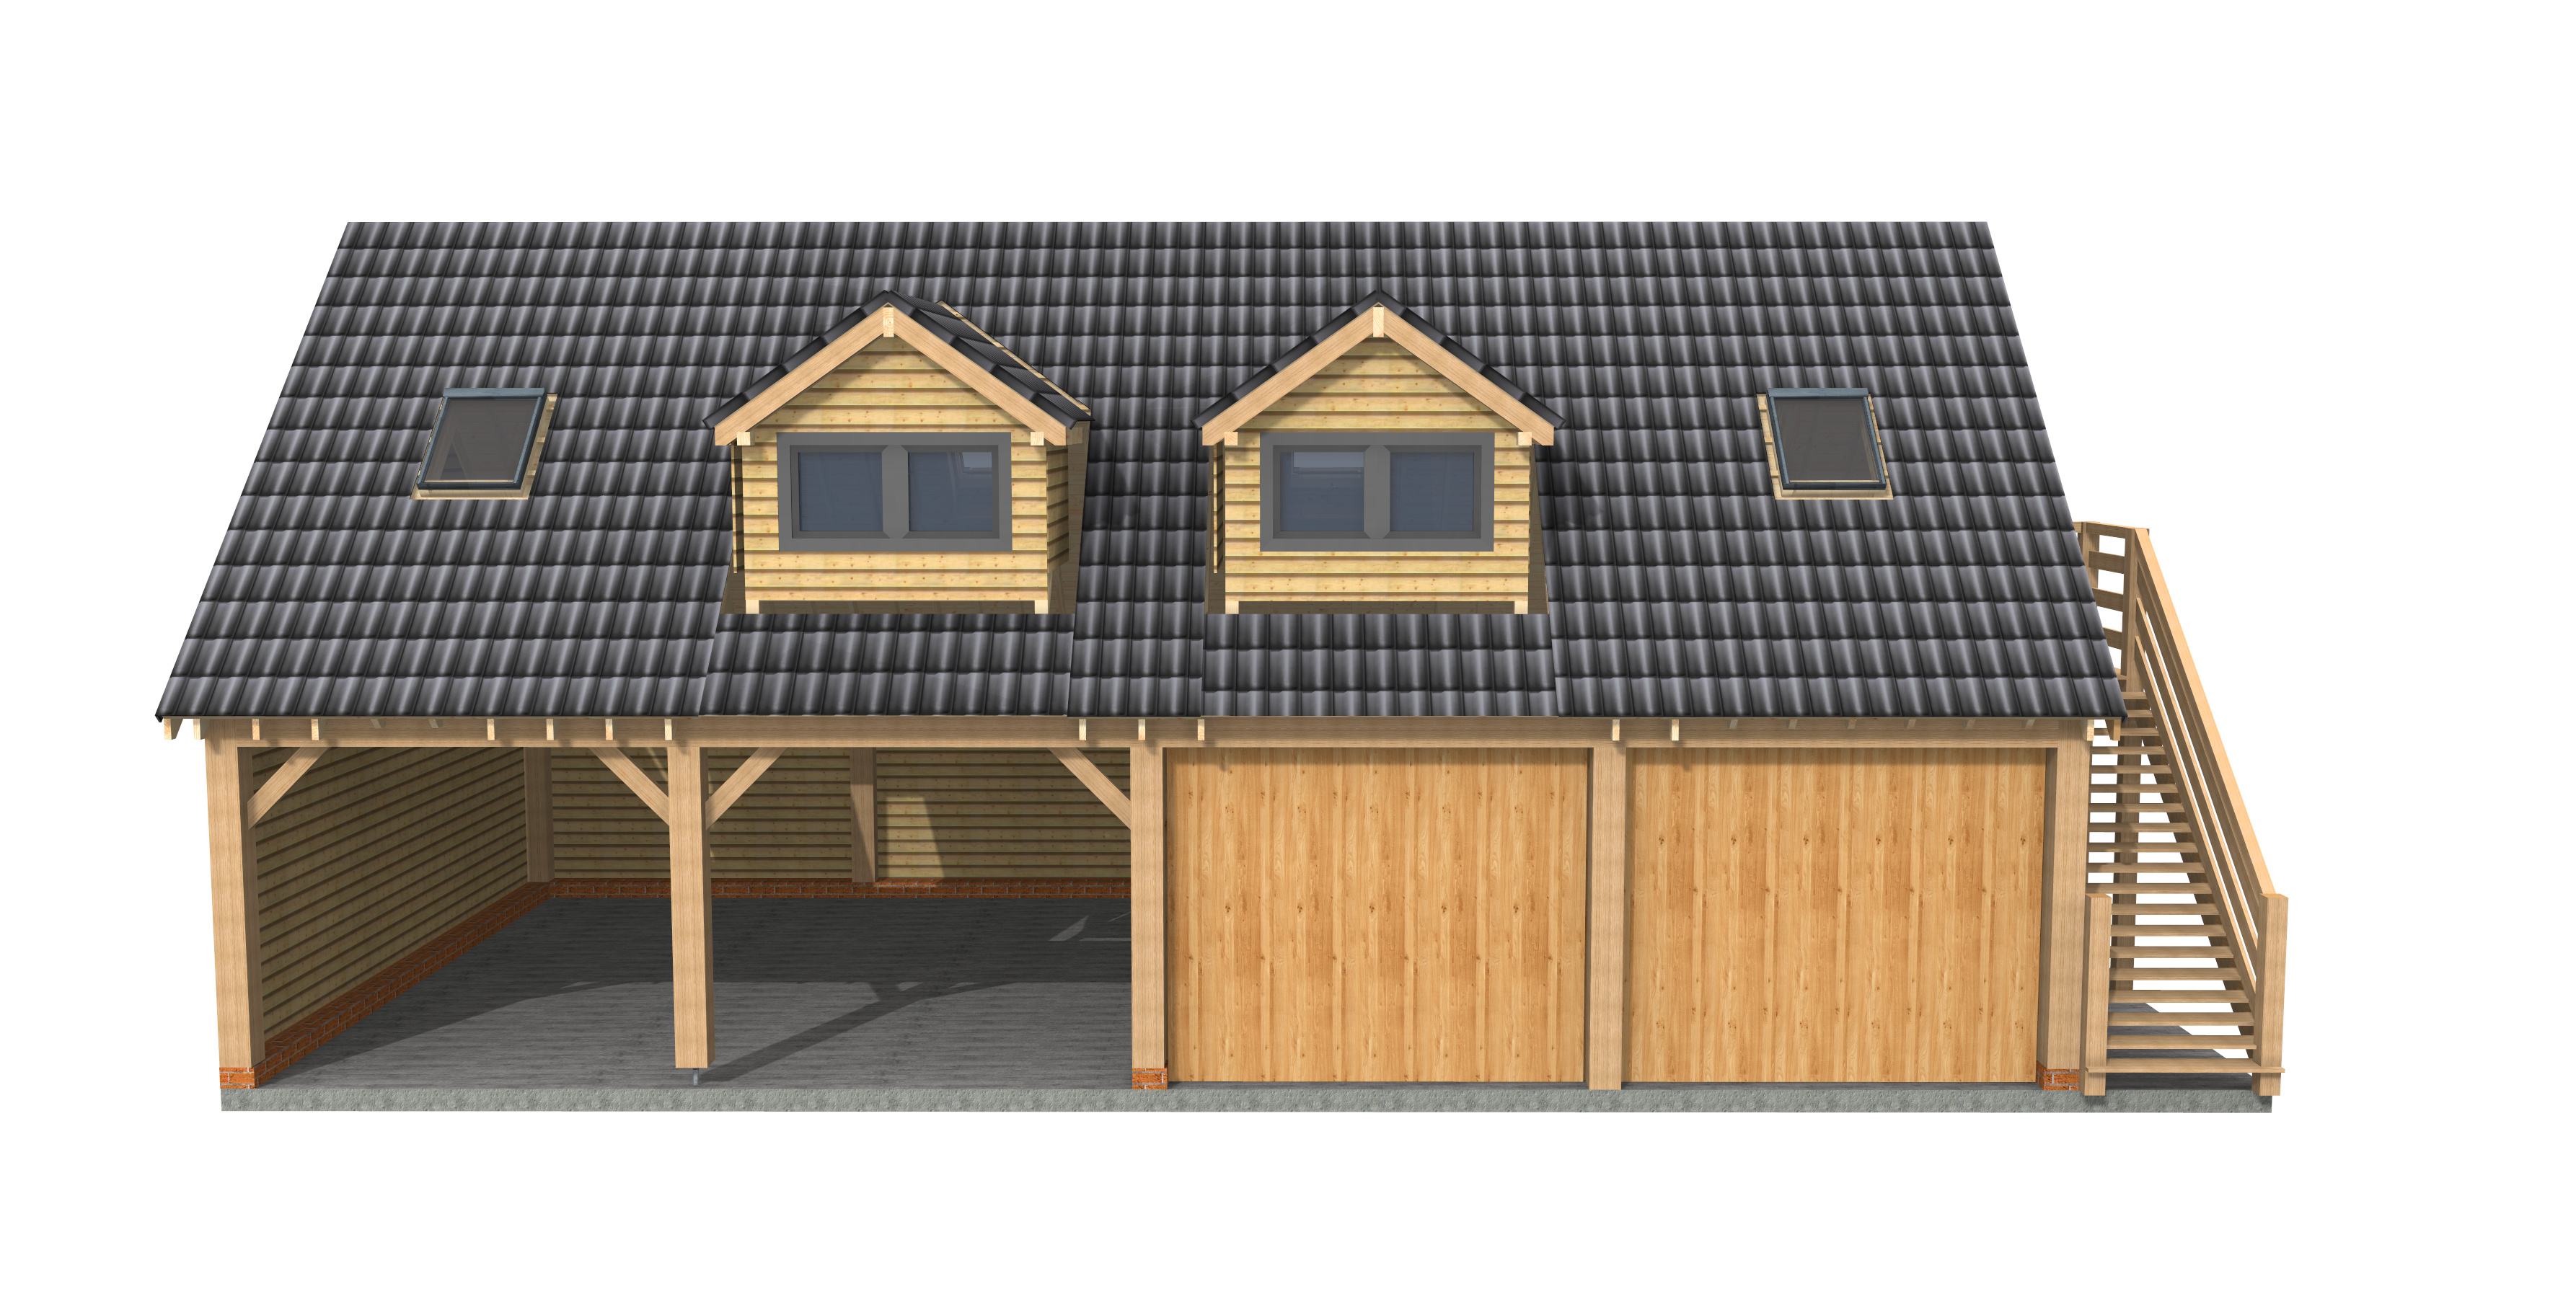 4 Bay Oak Frame Garage with Overhead room for The Pye Family